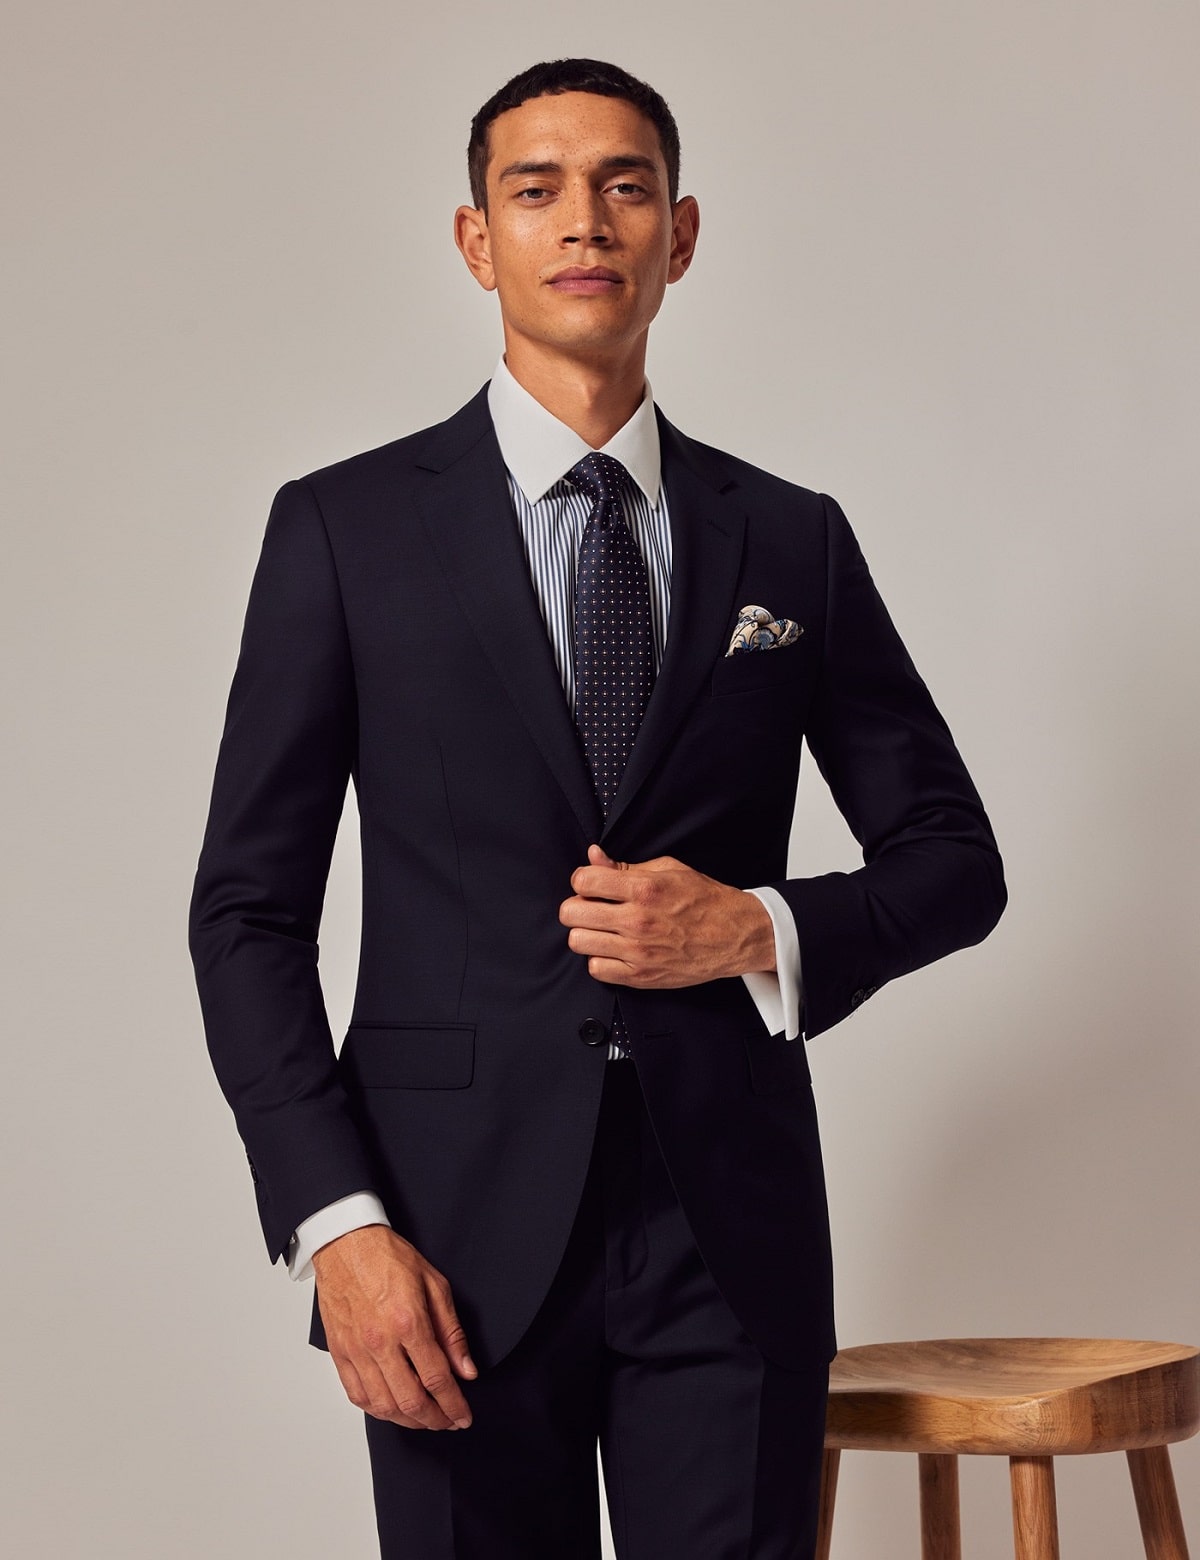 How to Shop for Your First Suit